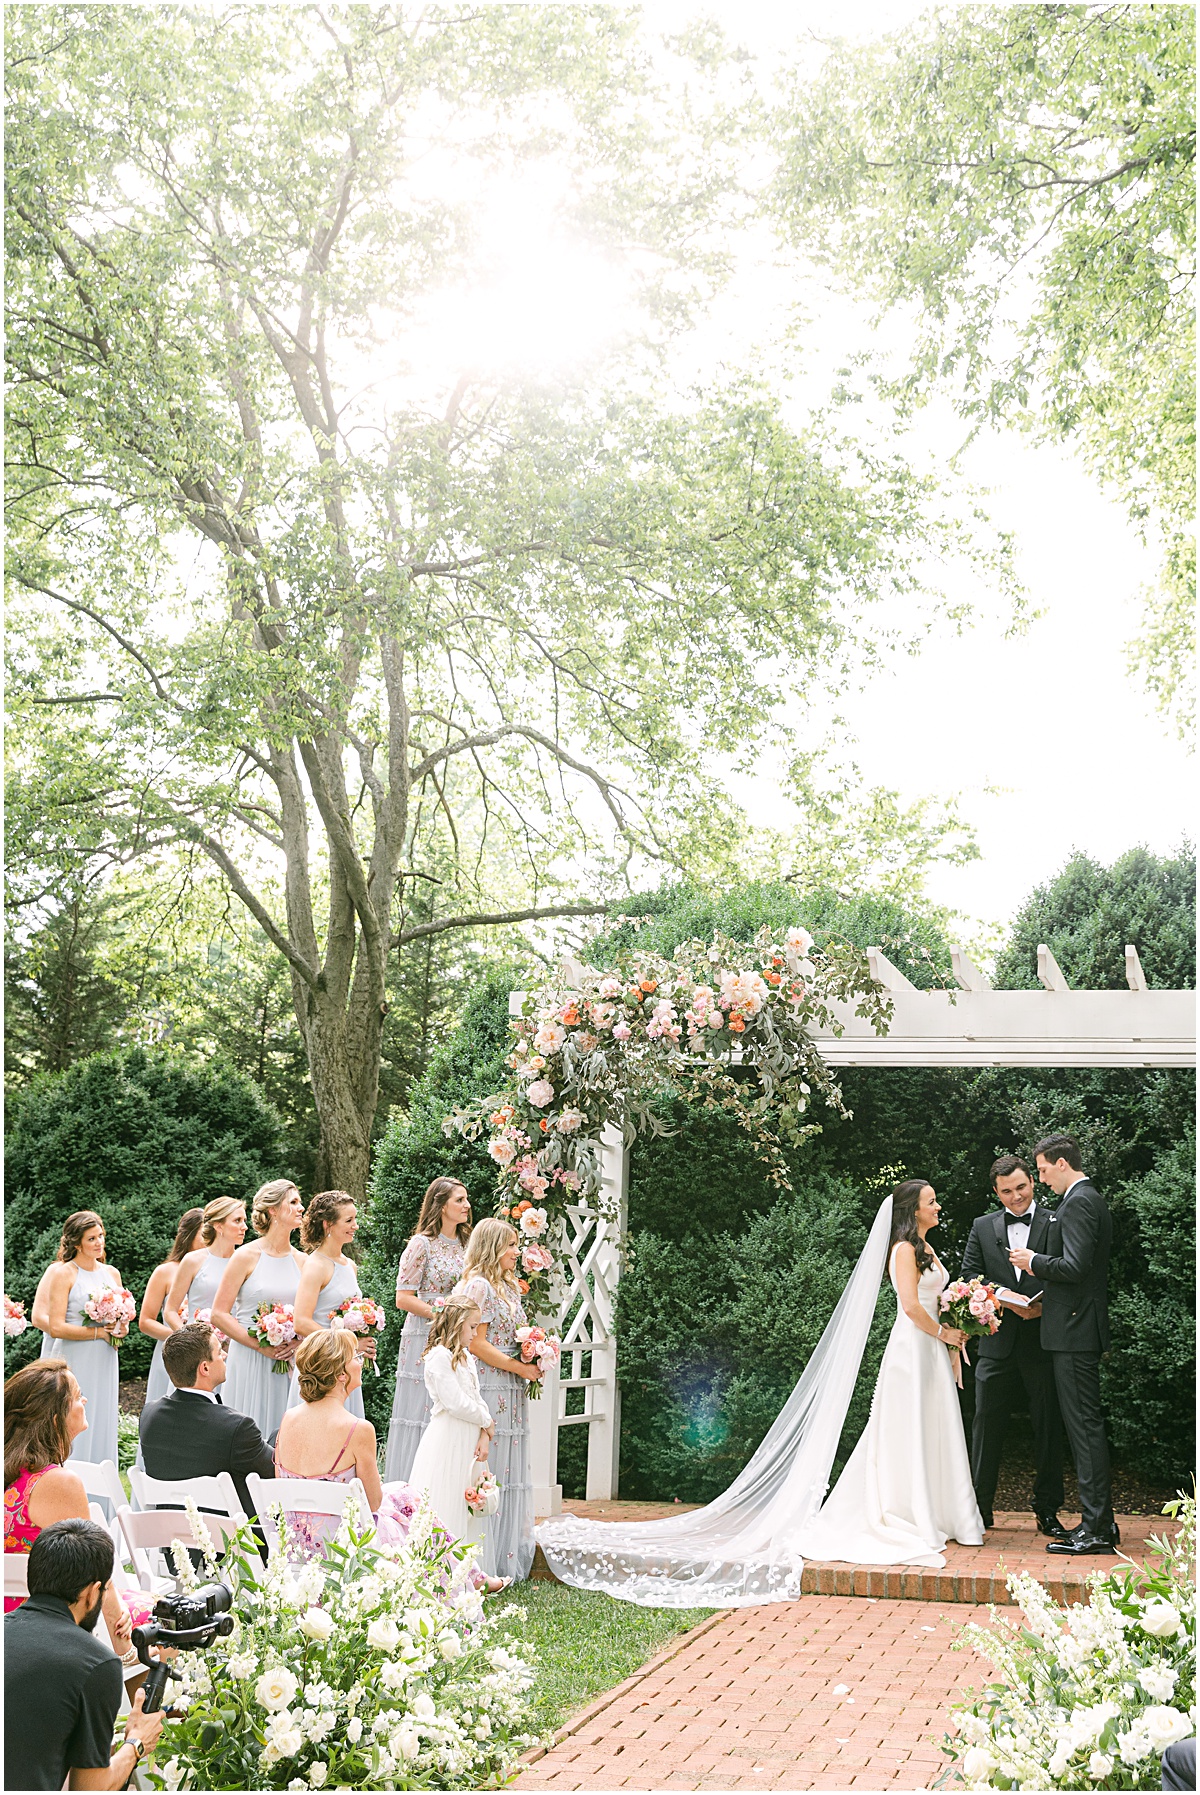 Joyful summer wedding at the Inn at Willow Grove by Sarah Bradshaw. Planning by Kelley Cannon Events. Florals by Holly Chapple.